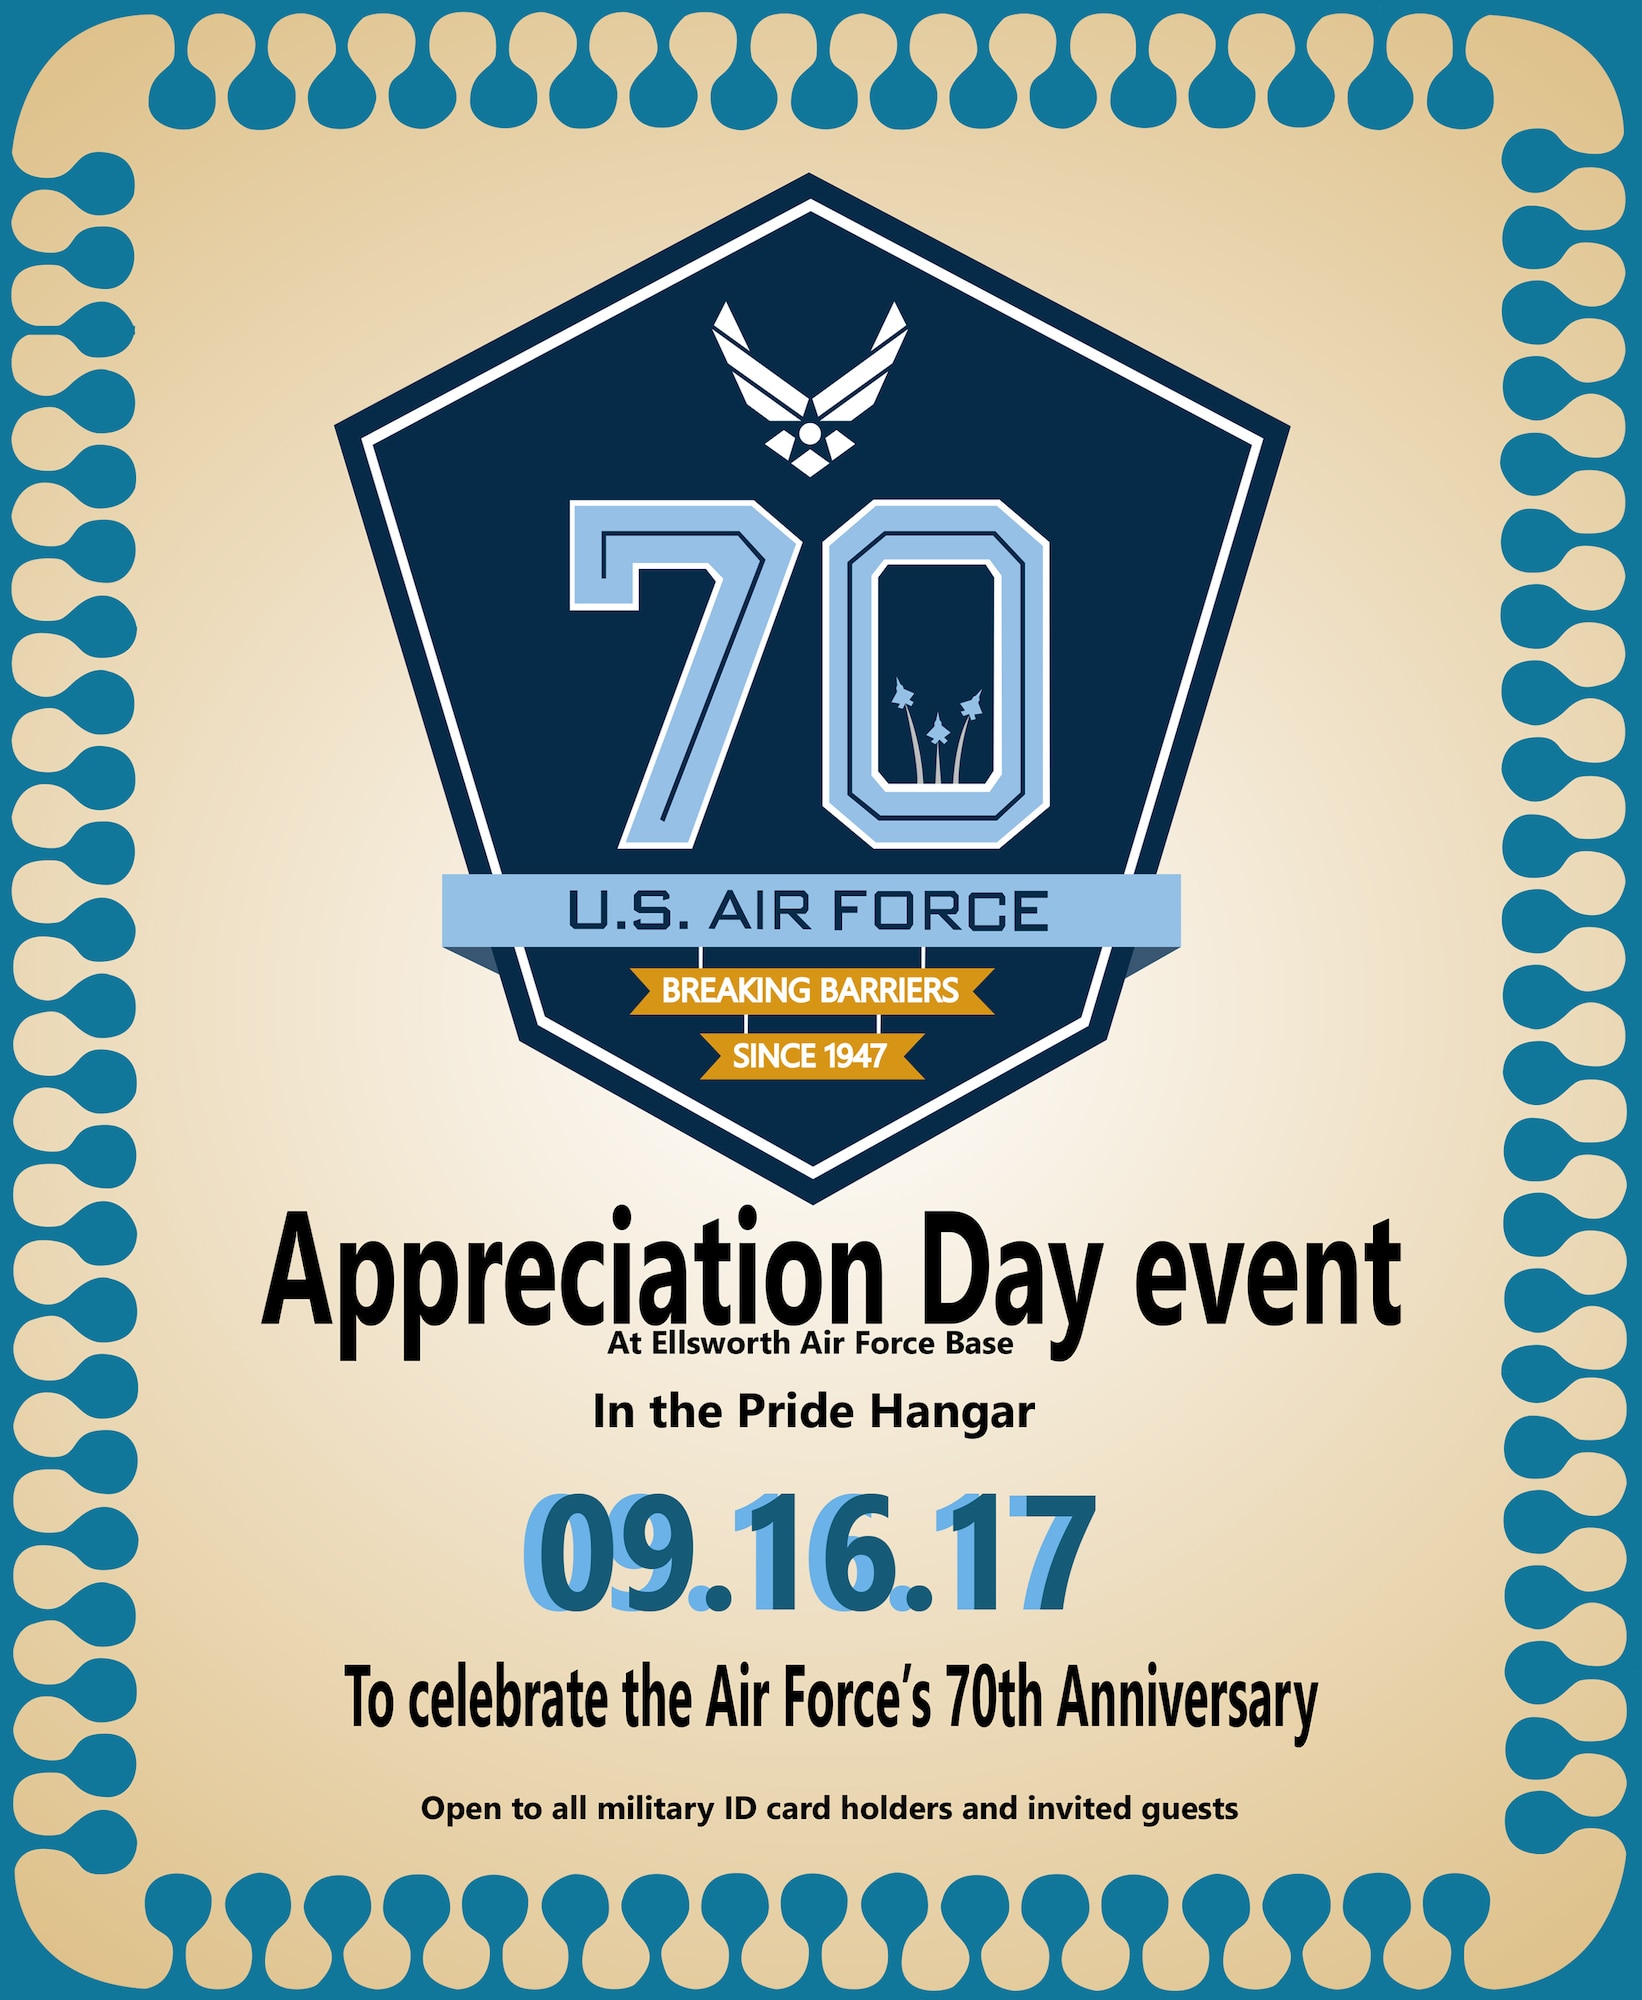 Ellsworth AFB is hosting an Appreciation Day event, Sep. 16, 2017 from 9 a.m. to 3 p.m., at the Pride Hangar. The event will feature the Air Force's 70th Anniversary, focusing on the innovation, teamwork and heritage of our Airmen.